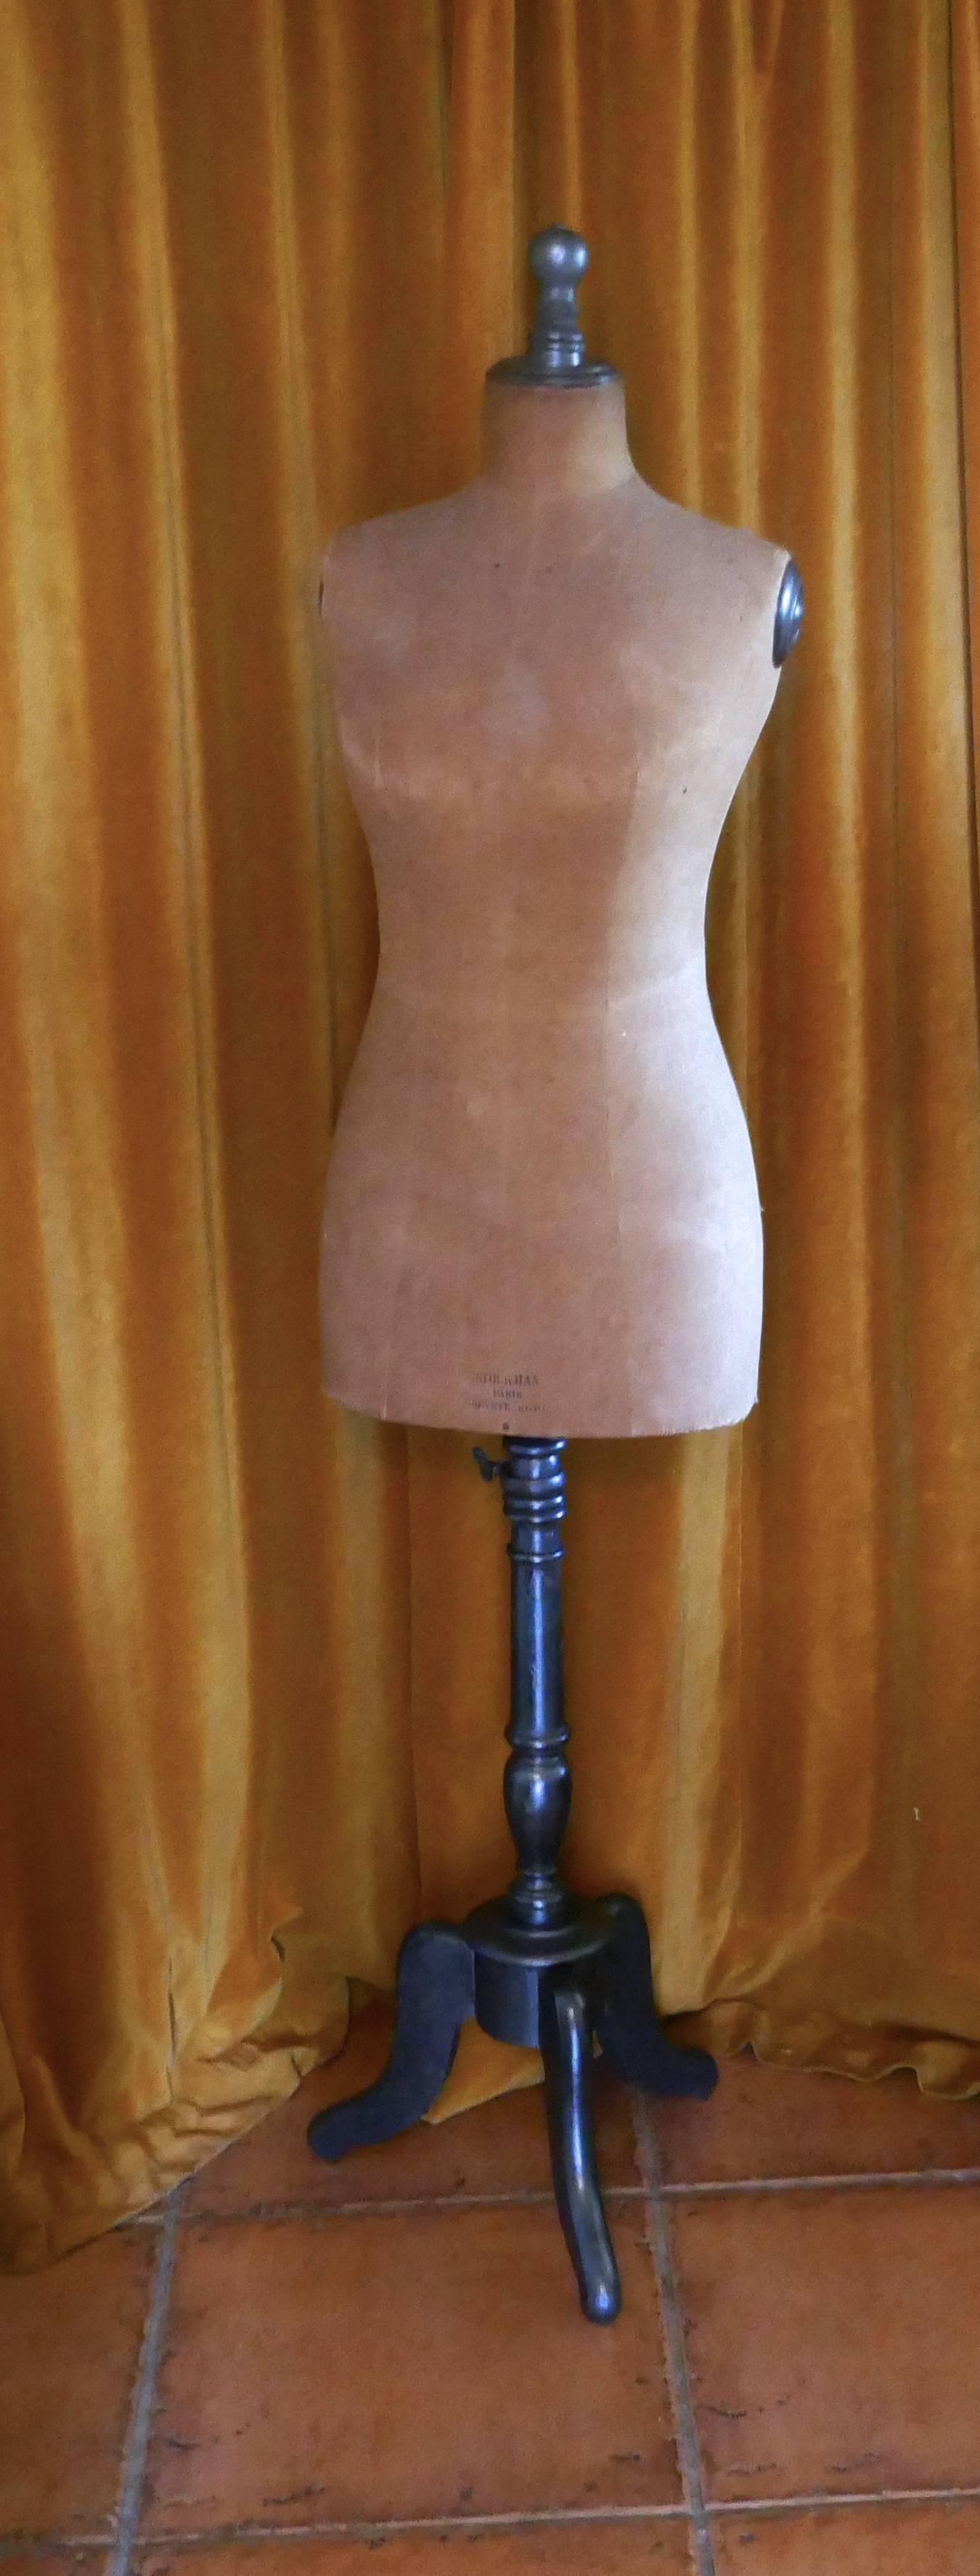 A vintage Stockman mannequin or tailors dummy


The mannequin or tailors dummy, dates from around 1900 she is in slightly shabby condition, the age darkened linen has a few small tears, there is a piece of her wooden arm disk missing, the Stand